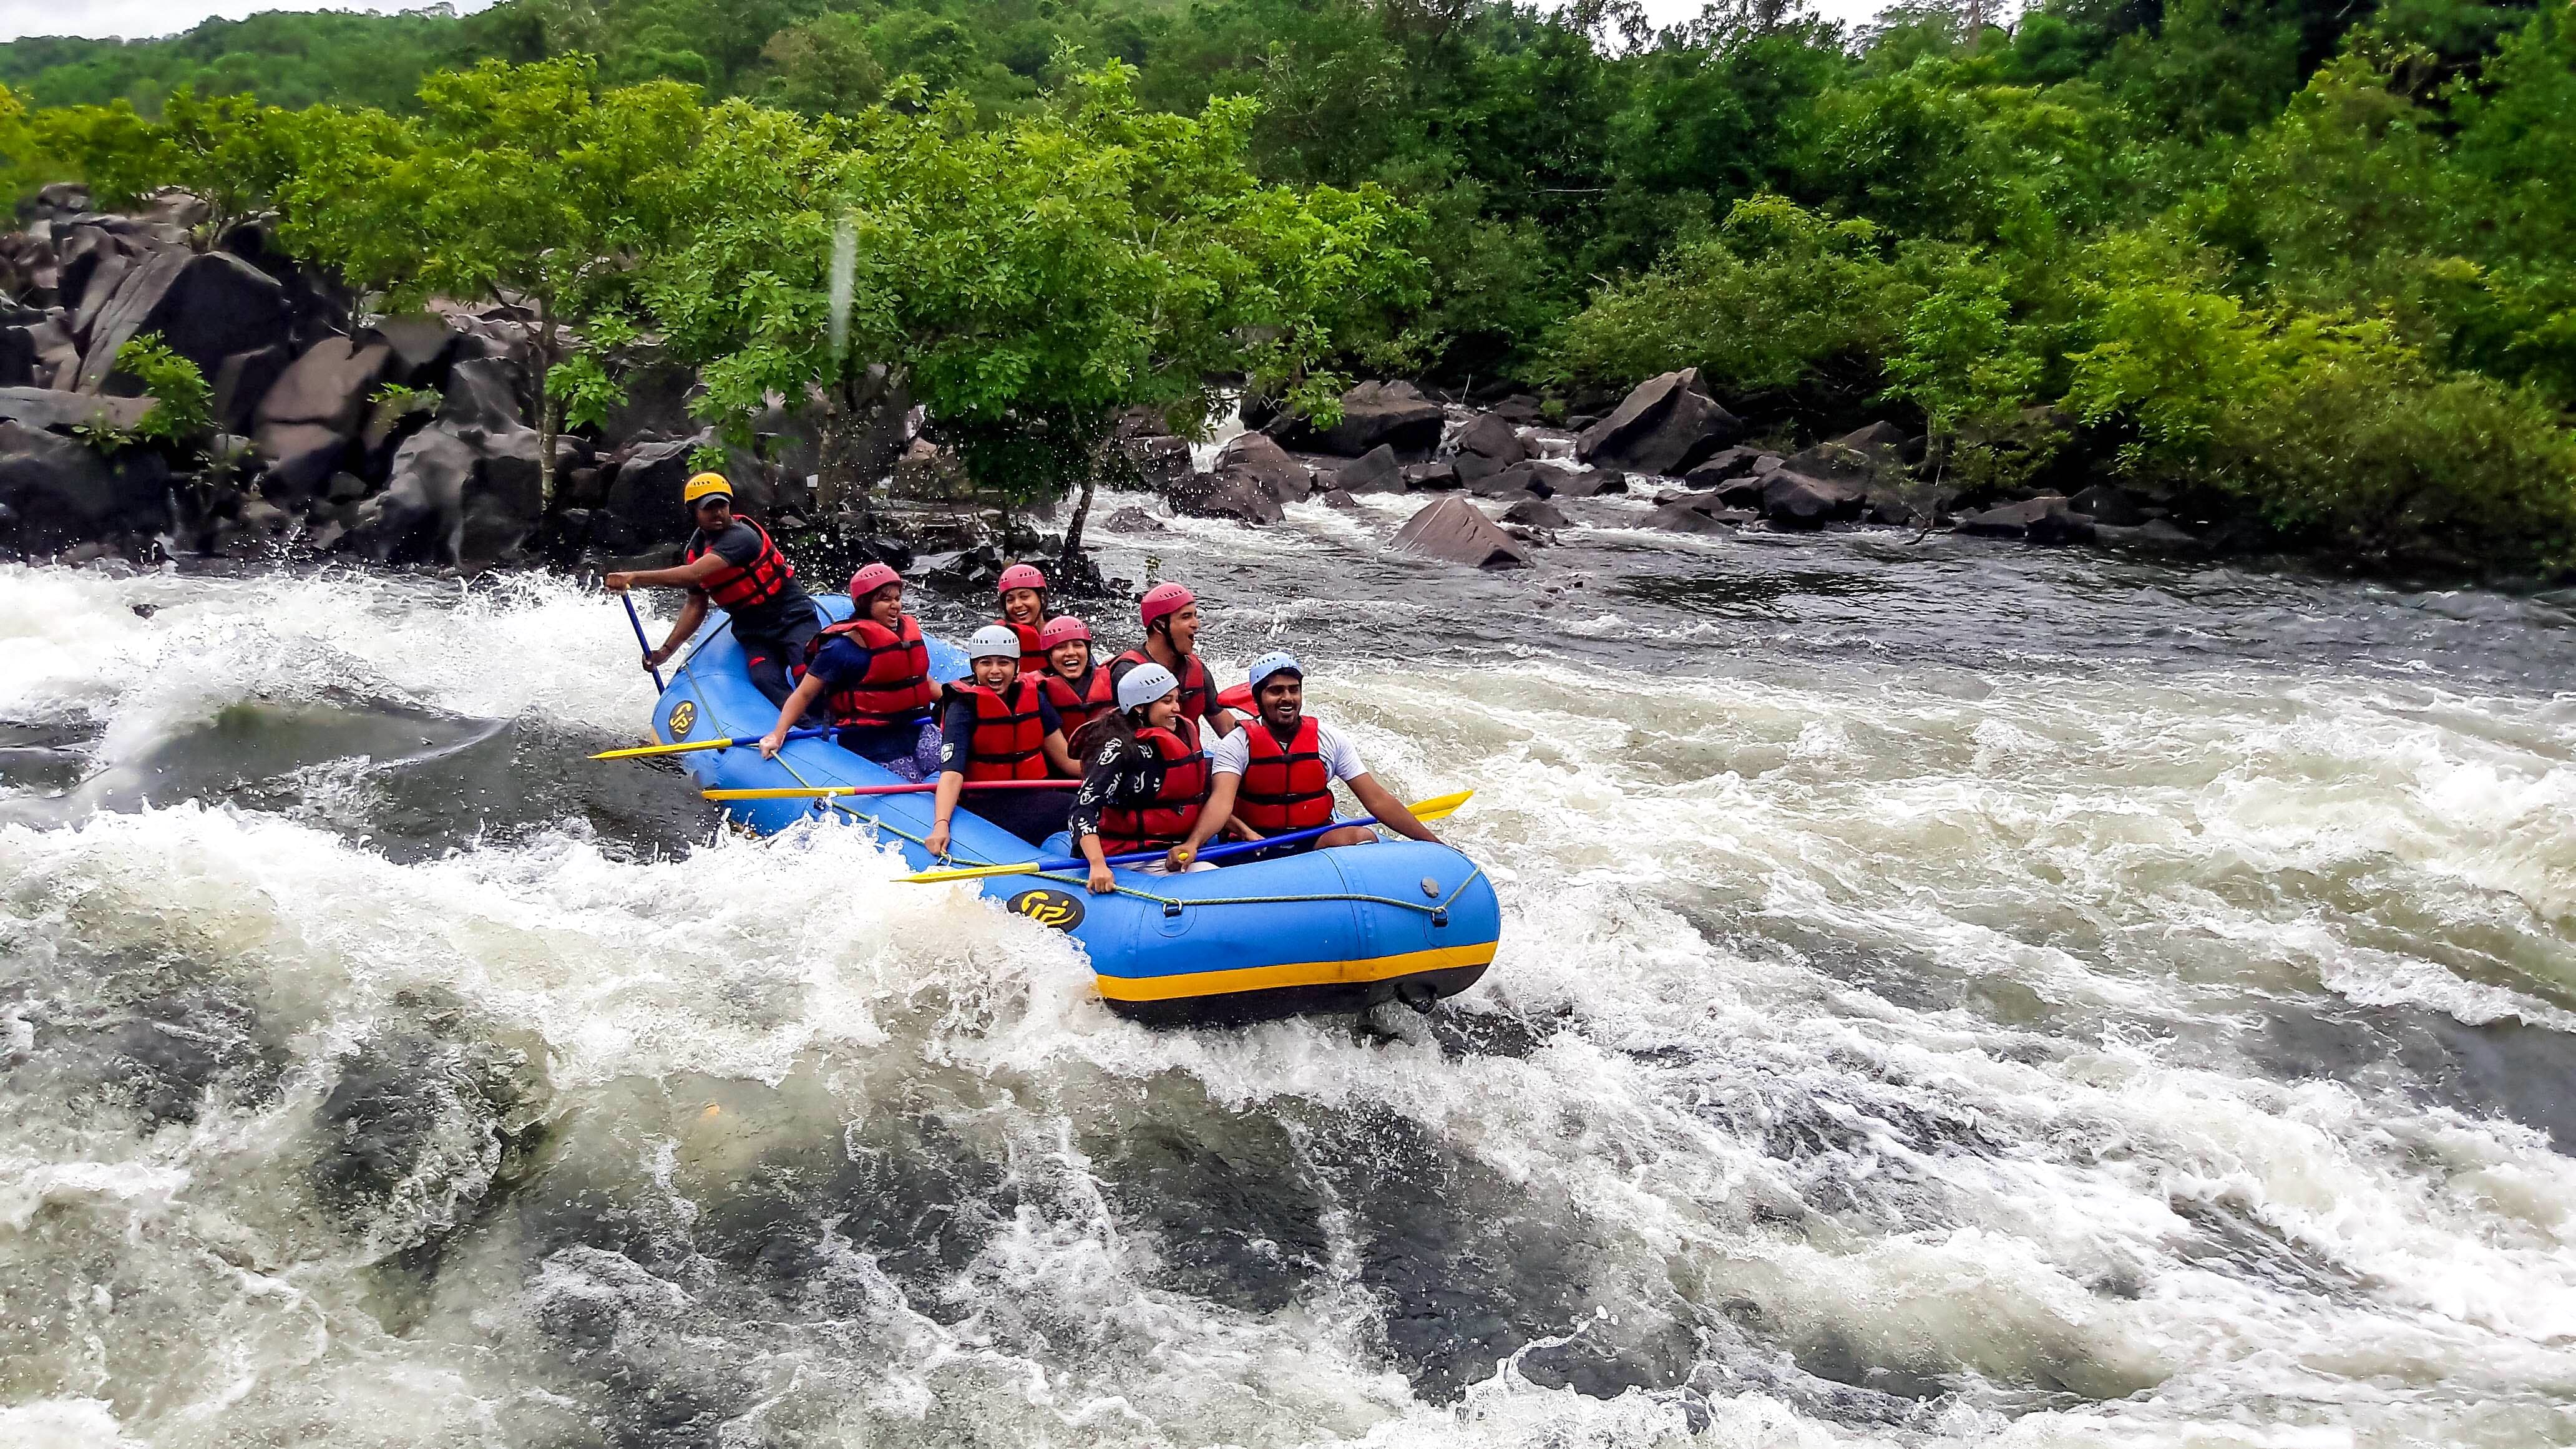 Rafting,Water transportation,River,Water resources,Inflatable boat,Rapid,Watercourse,Raft,Outdoor recreation,Water sport